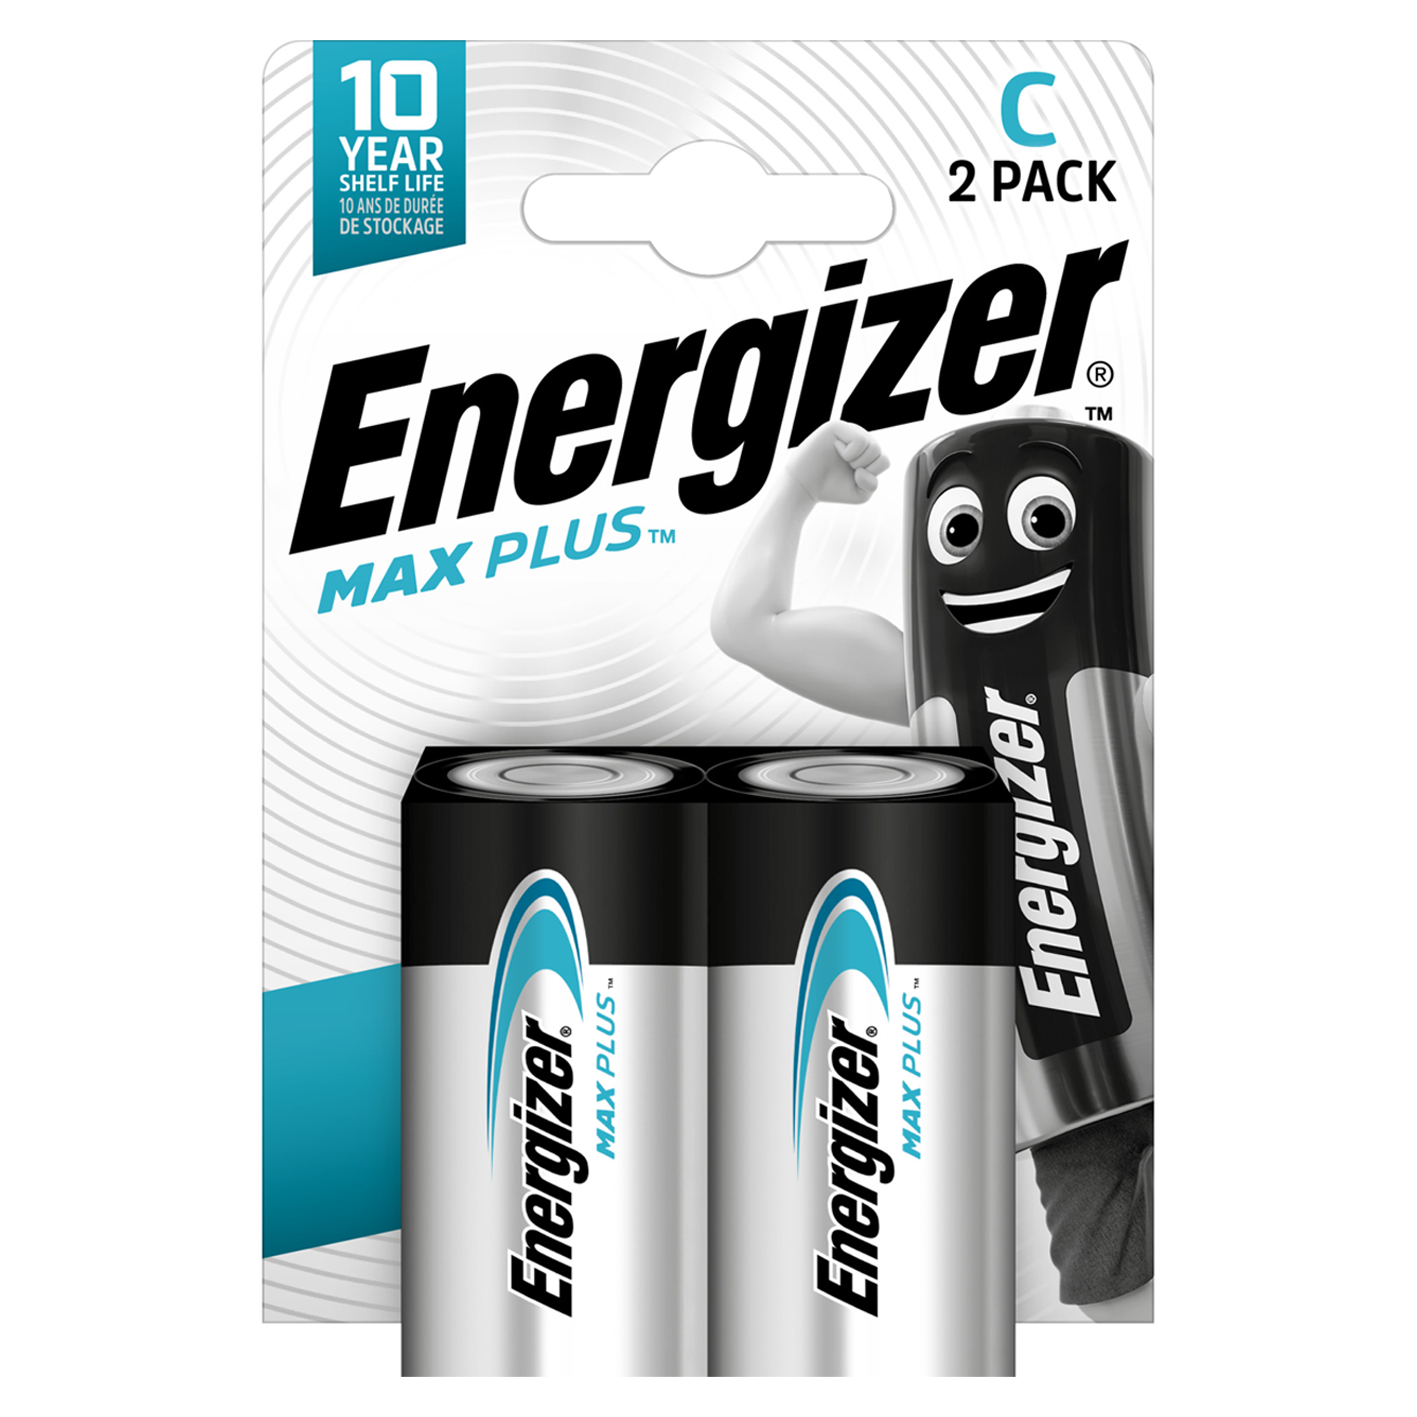 Energizer® C Size Max Plus Alkaline, Pack of 2